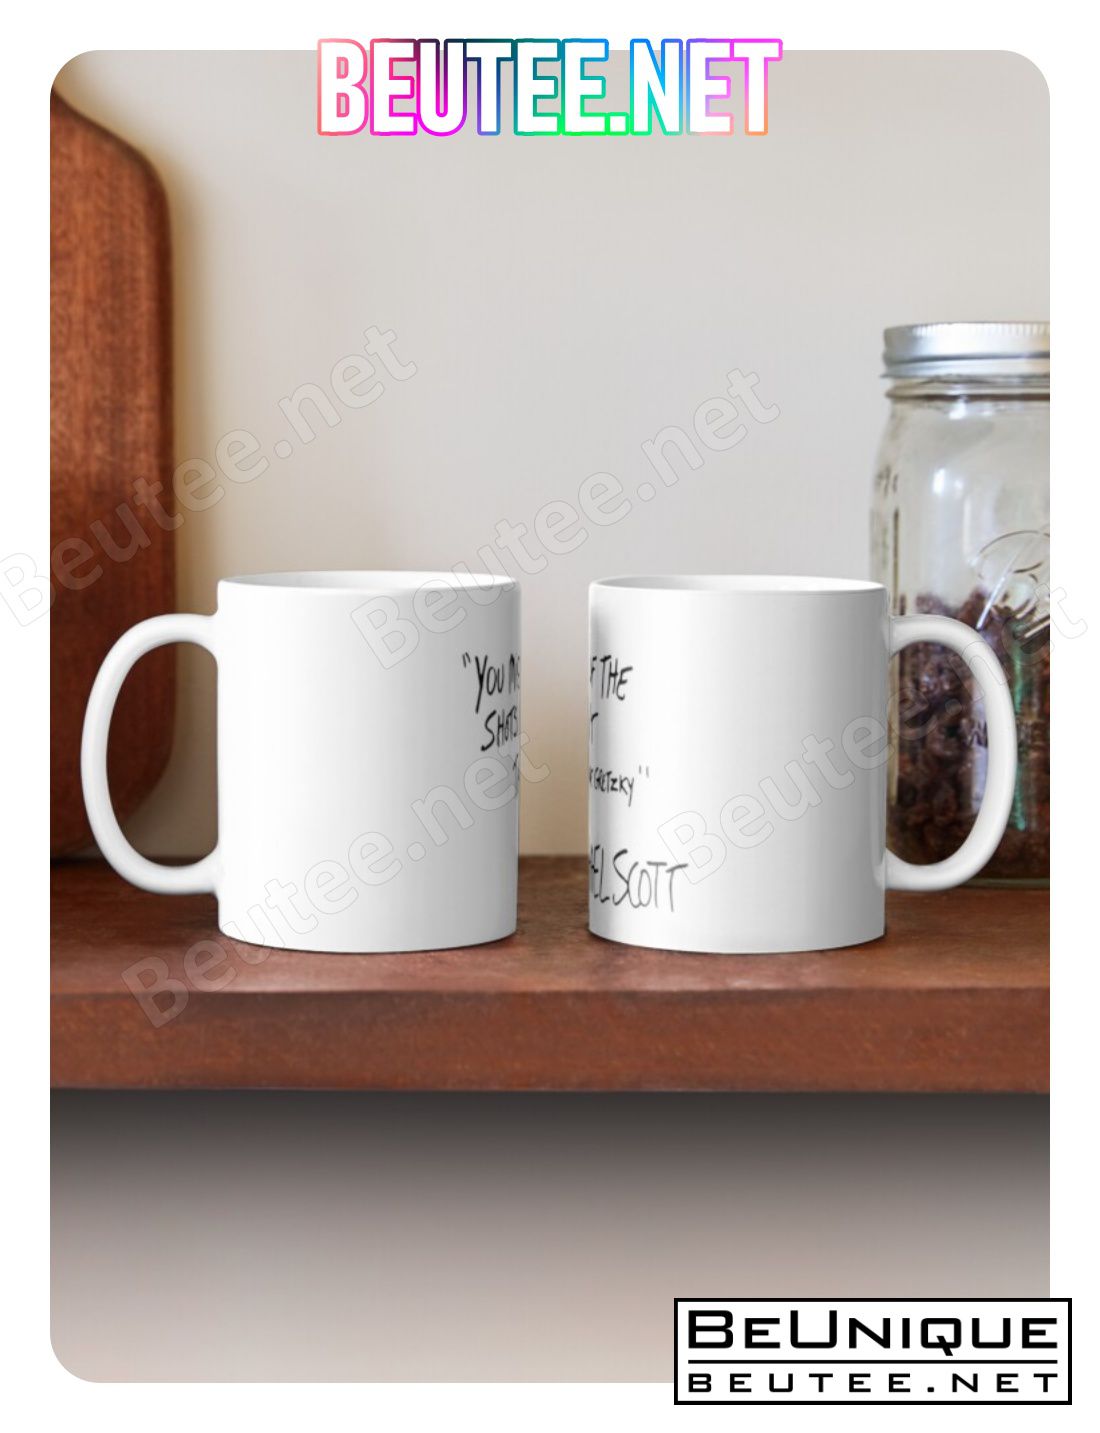 You Miss 100% Of The Shots You Don't Take - The Office Coffee Mug